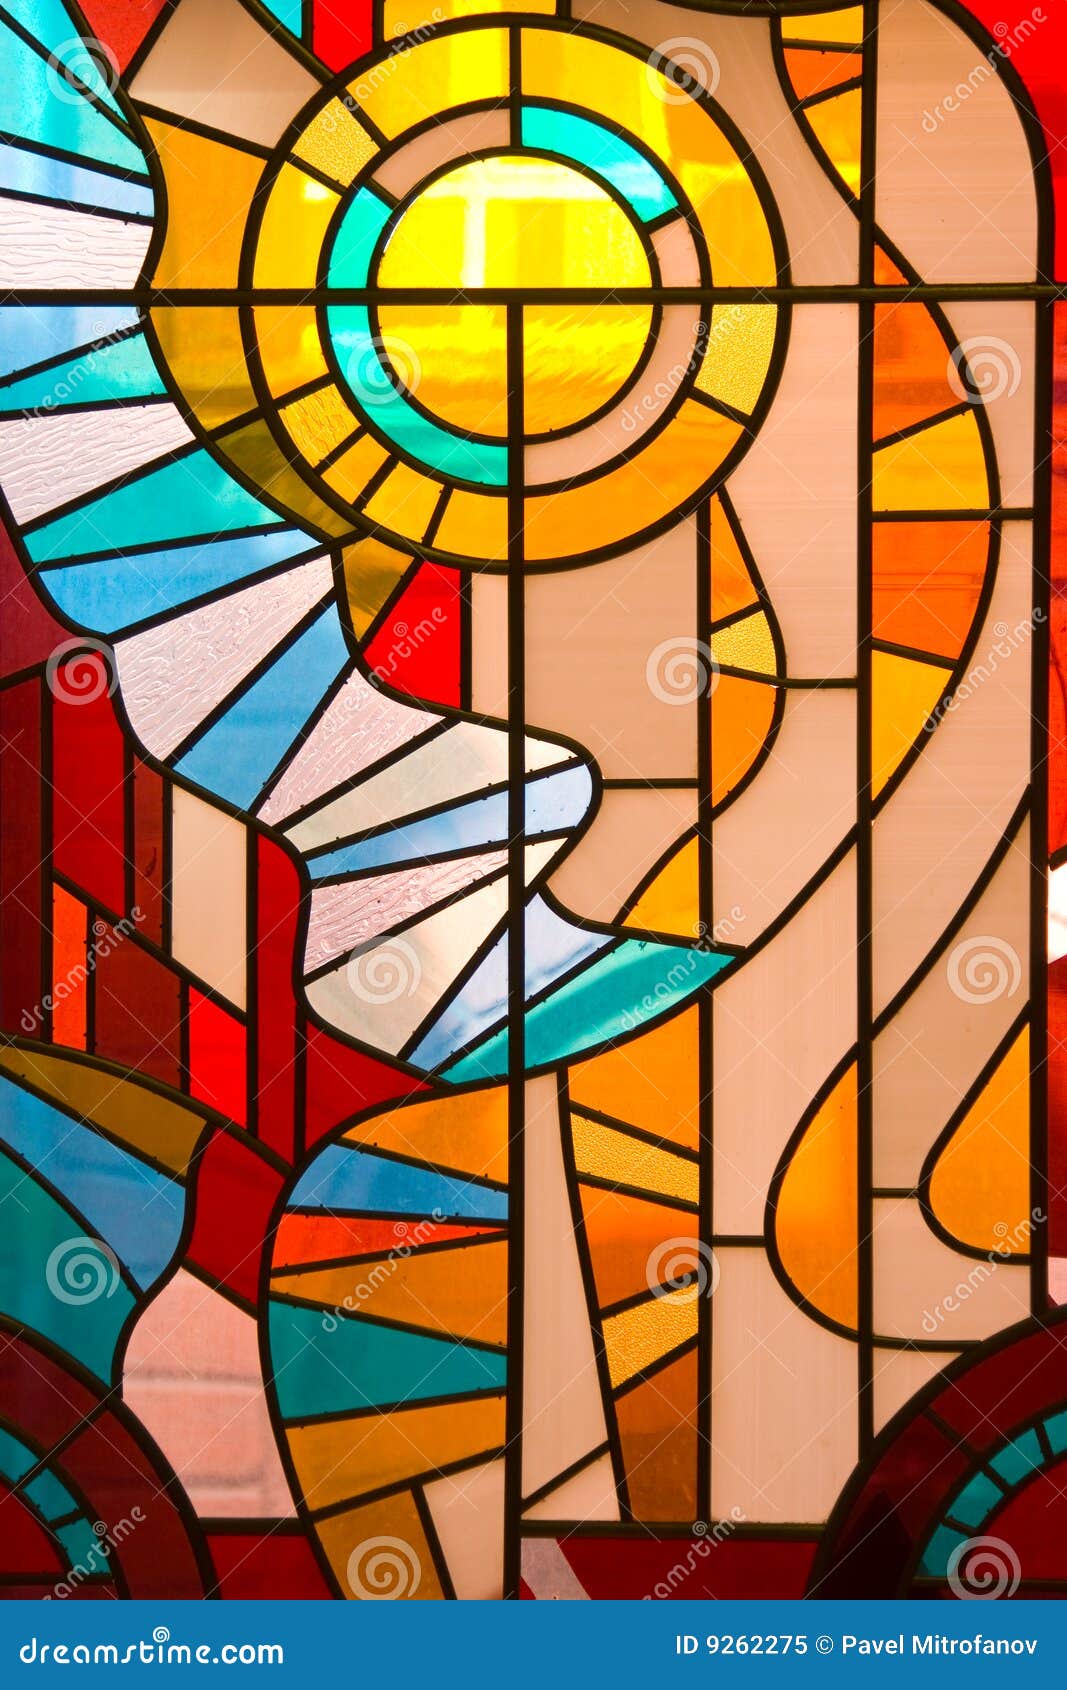 stained glass window clipart - photo #13